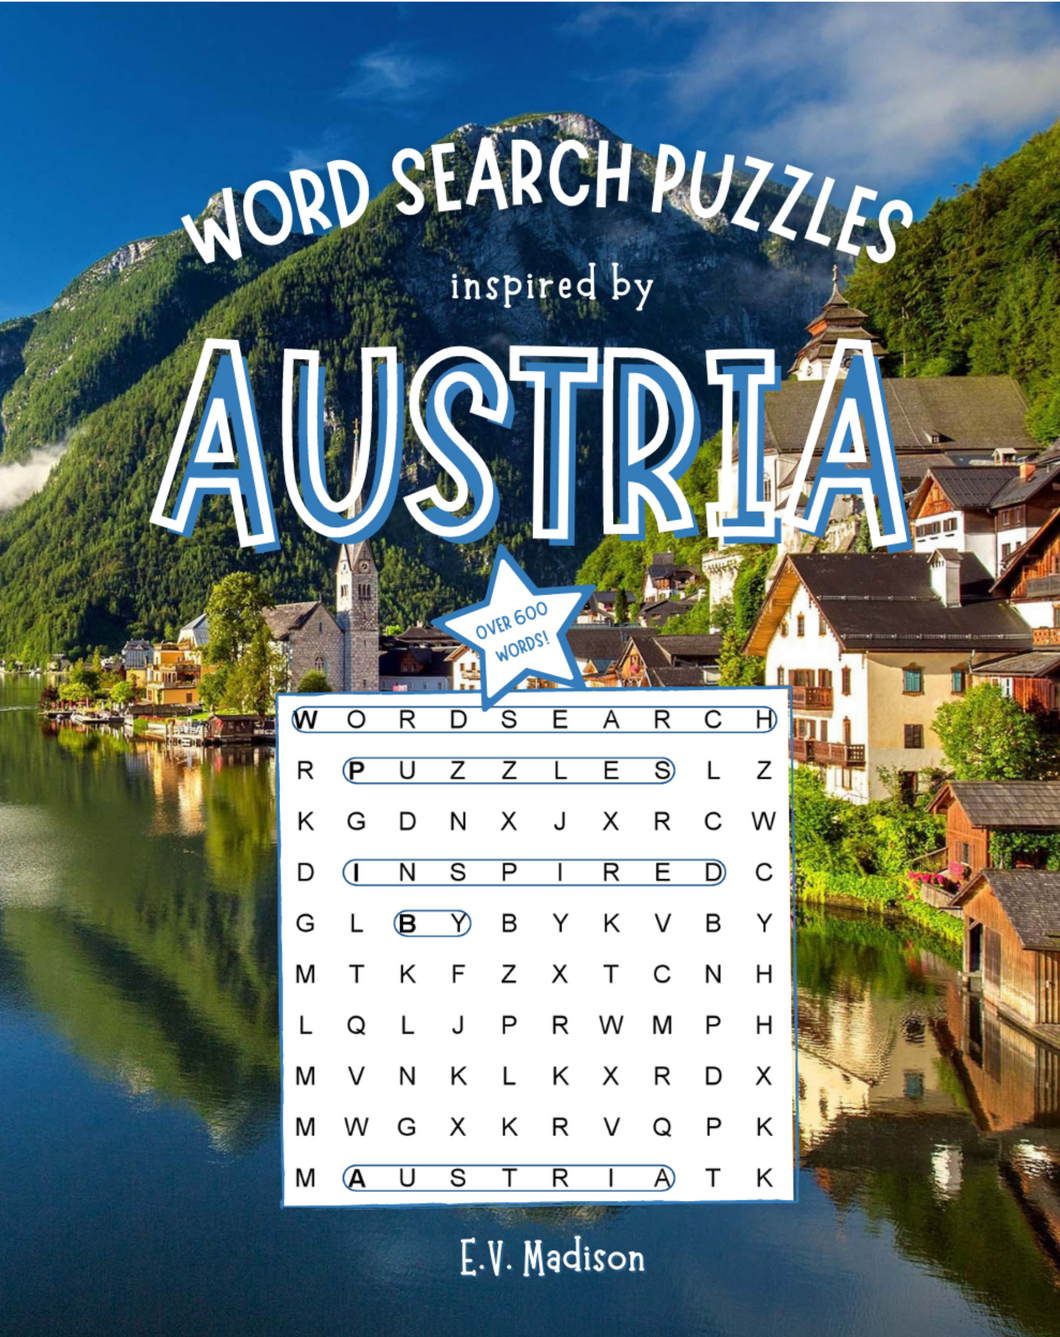 Word Search Puzzles Inspired by Austria